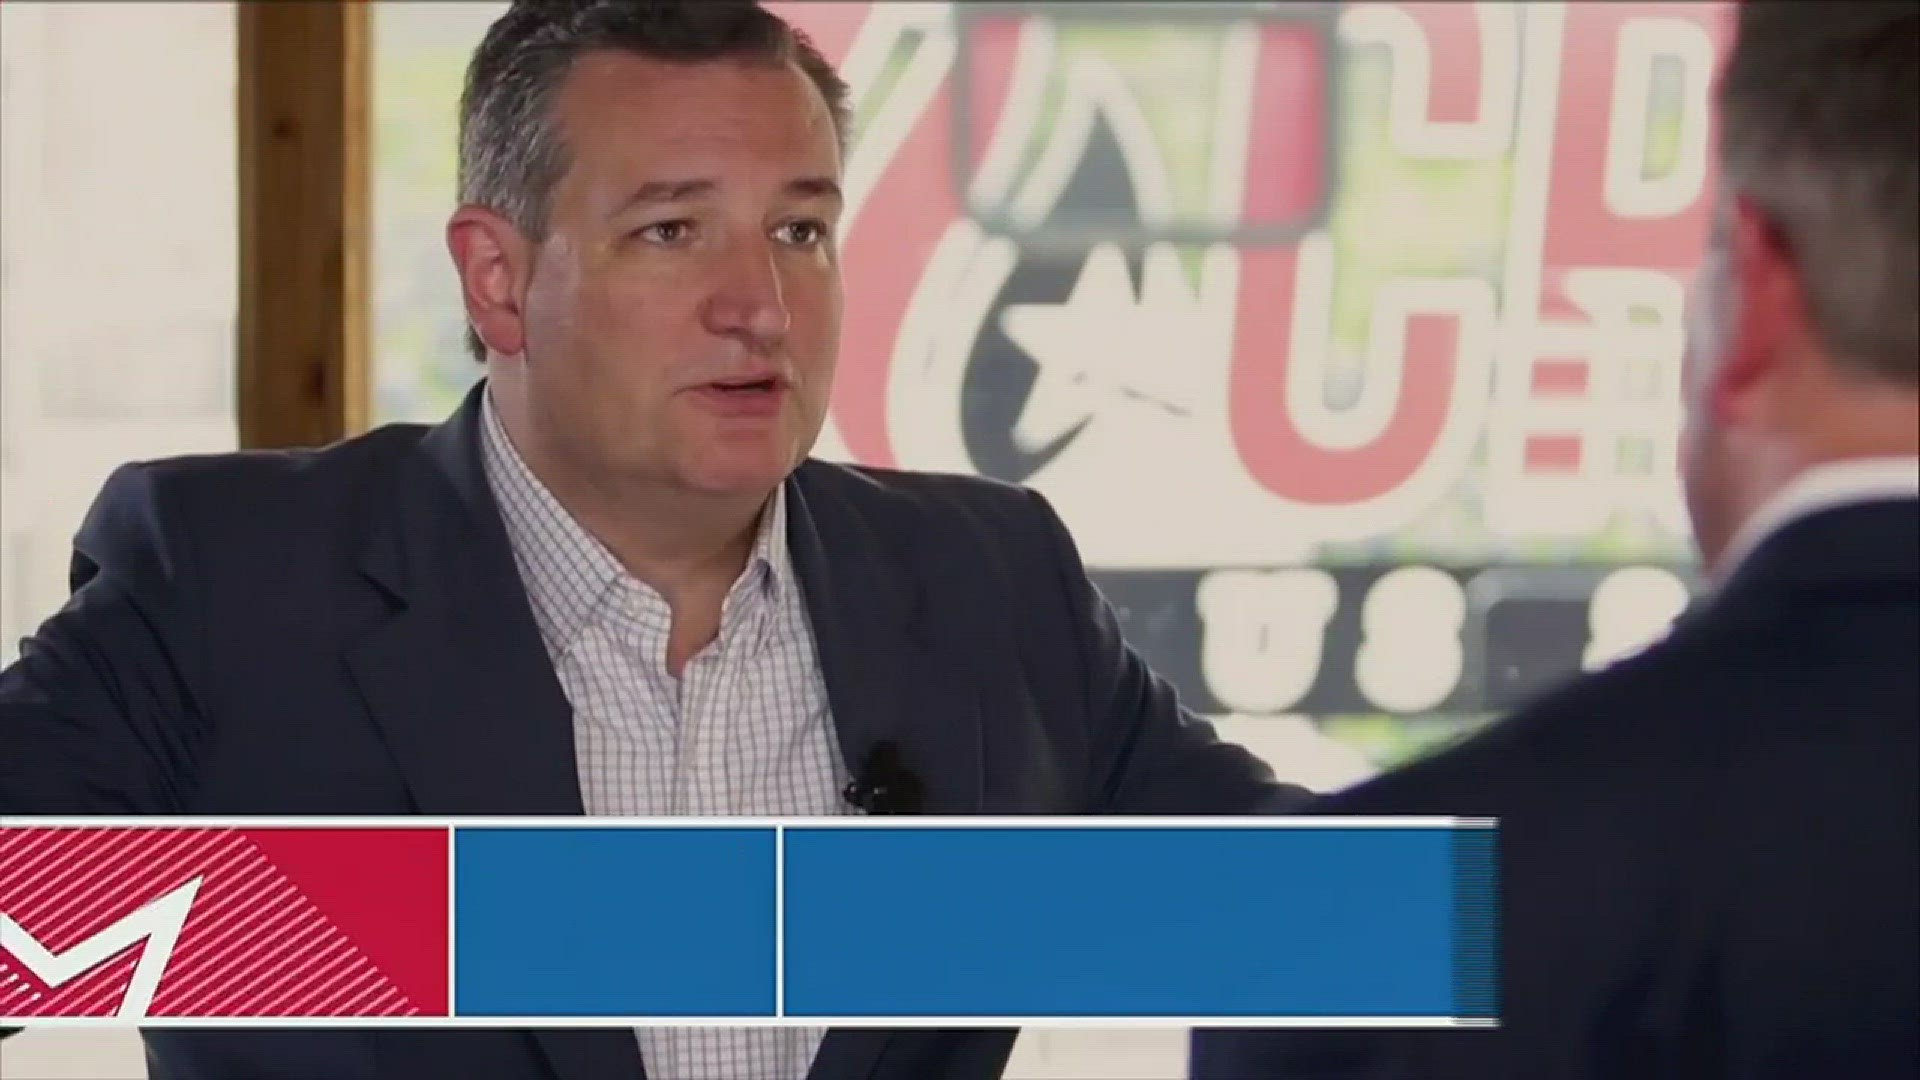 Ted Cruz joined the show to discuss his competitive senate race with Beto O'Rourke.